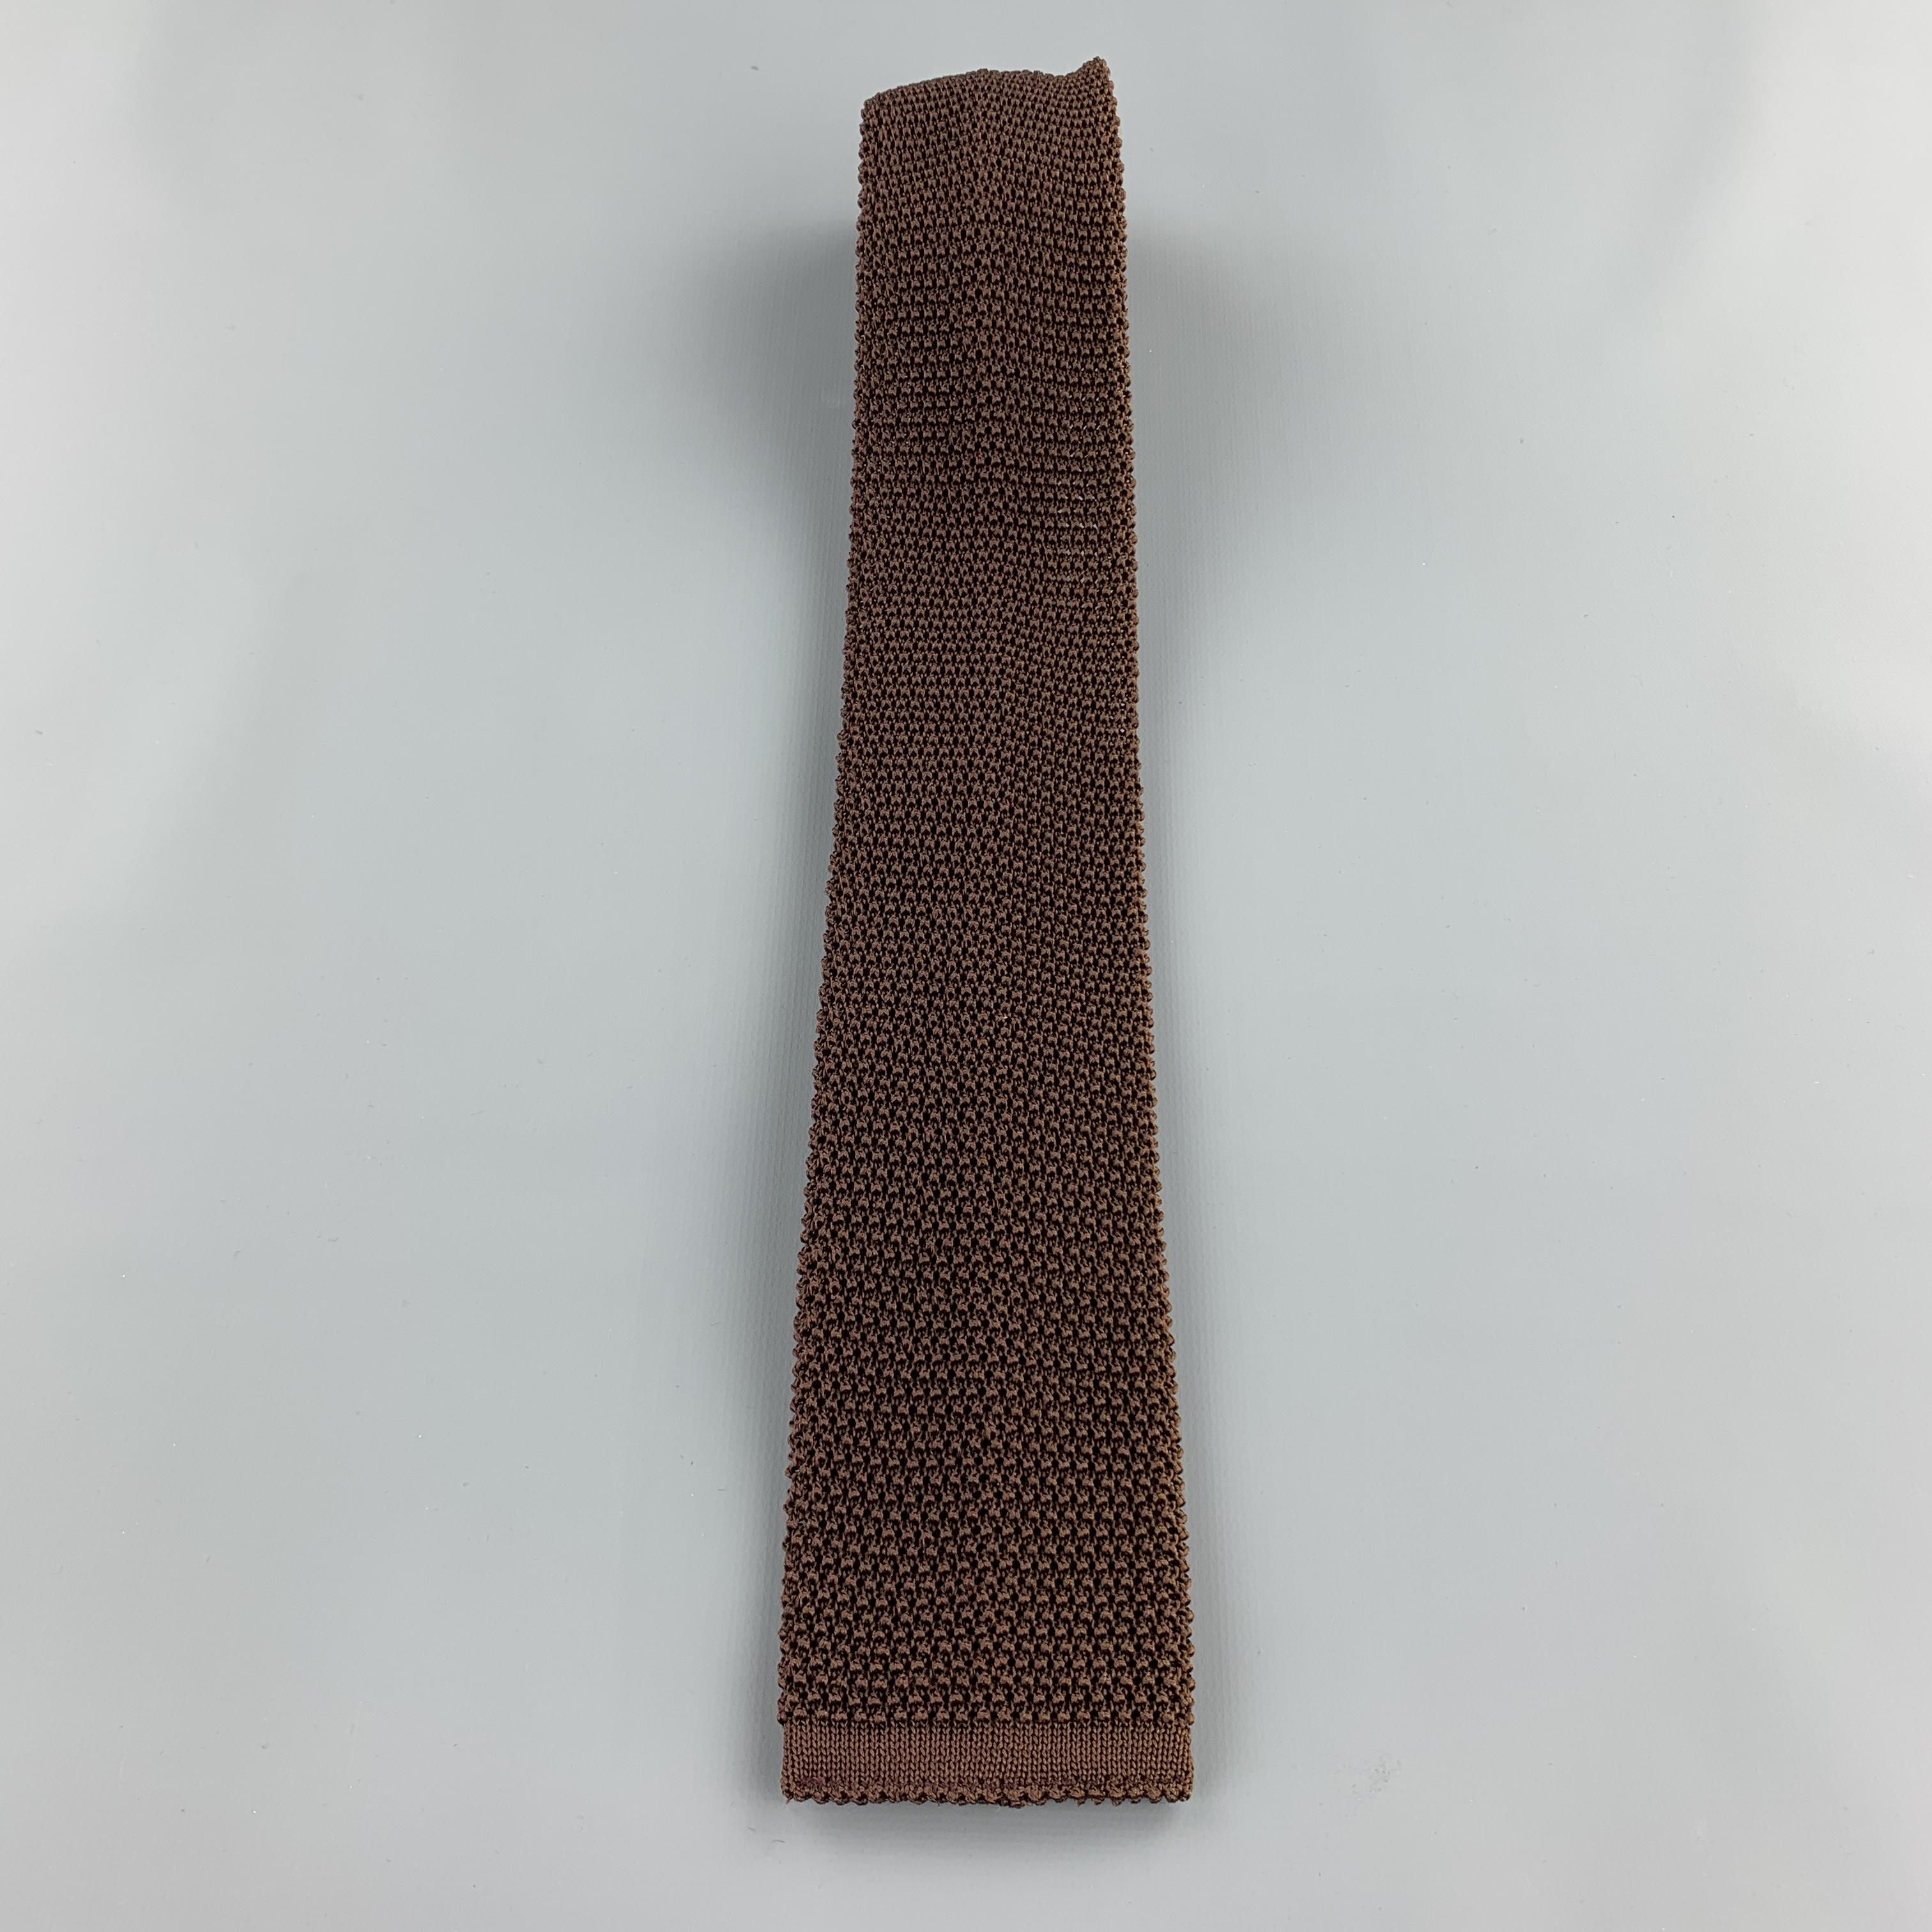 NEW & LINGWOOD necktie comes in a brown knitted textured silk. Made in Italy. 

Excellent Pre-Owned Condition.

Width: 2.7 in.